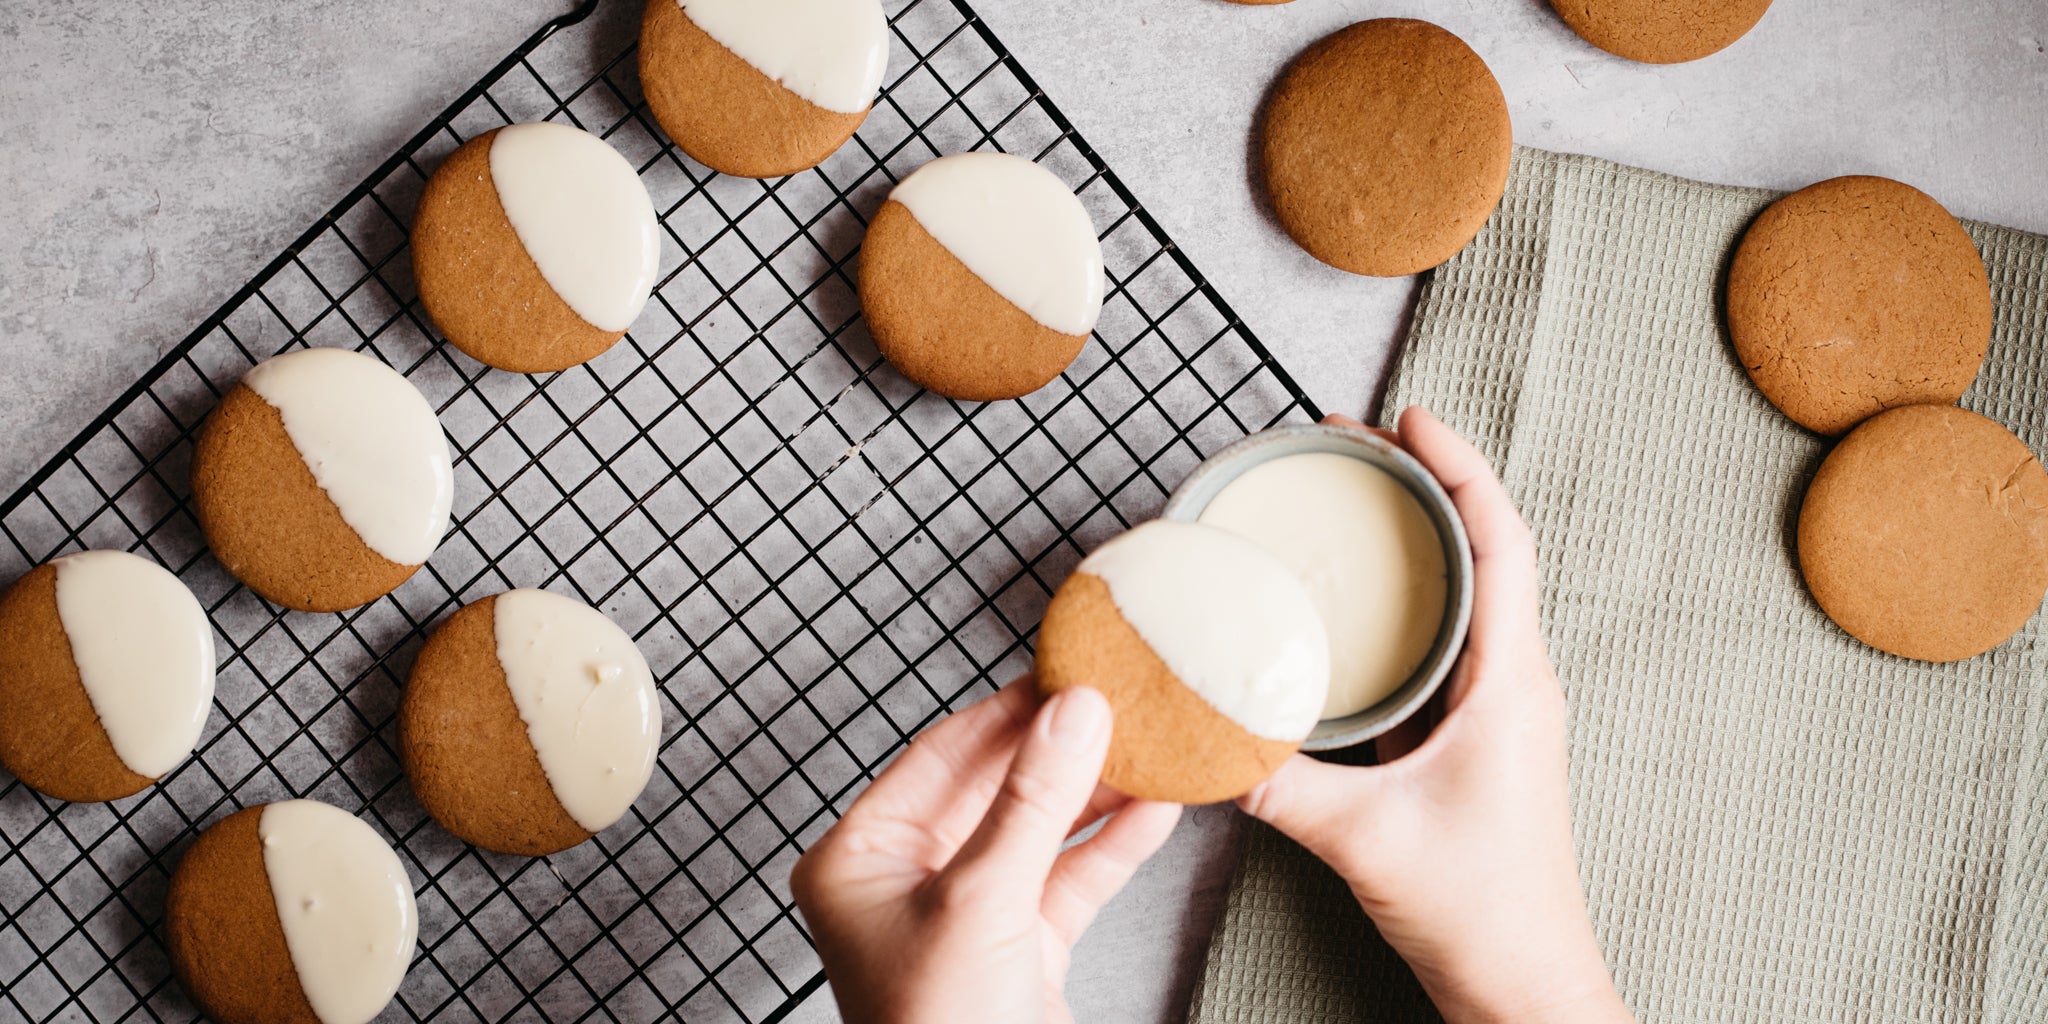 Citrus Gingerbread Cookies being hand dipped in white chocolate with a hand, and left to set on a wire rack,